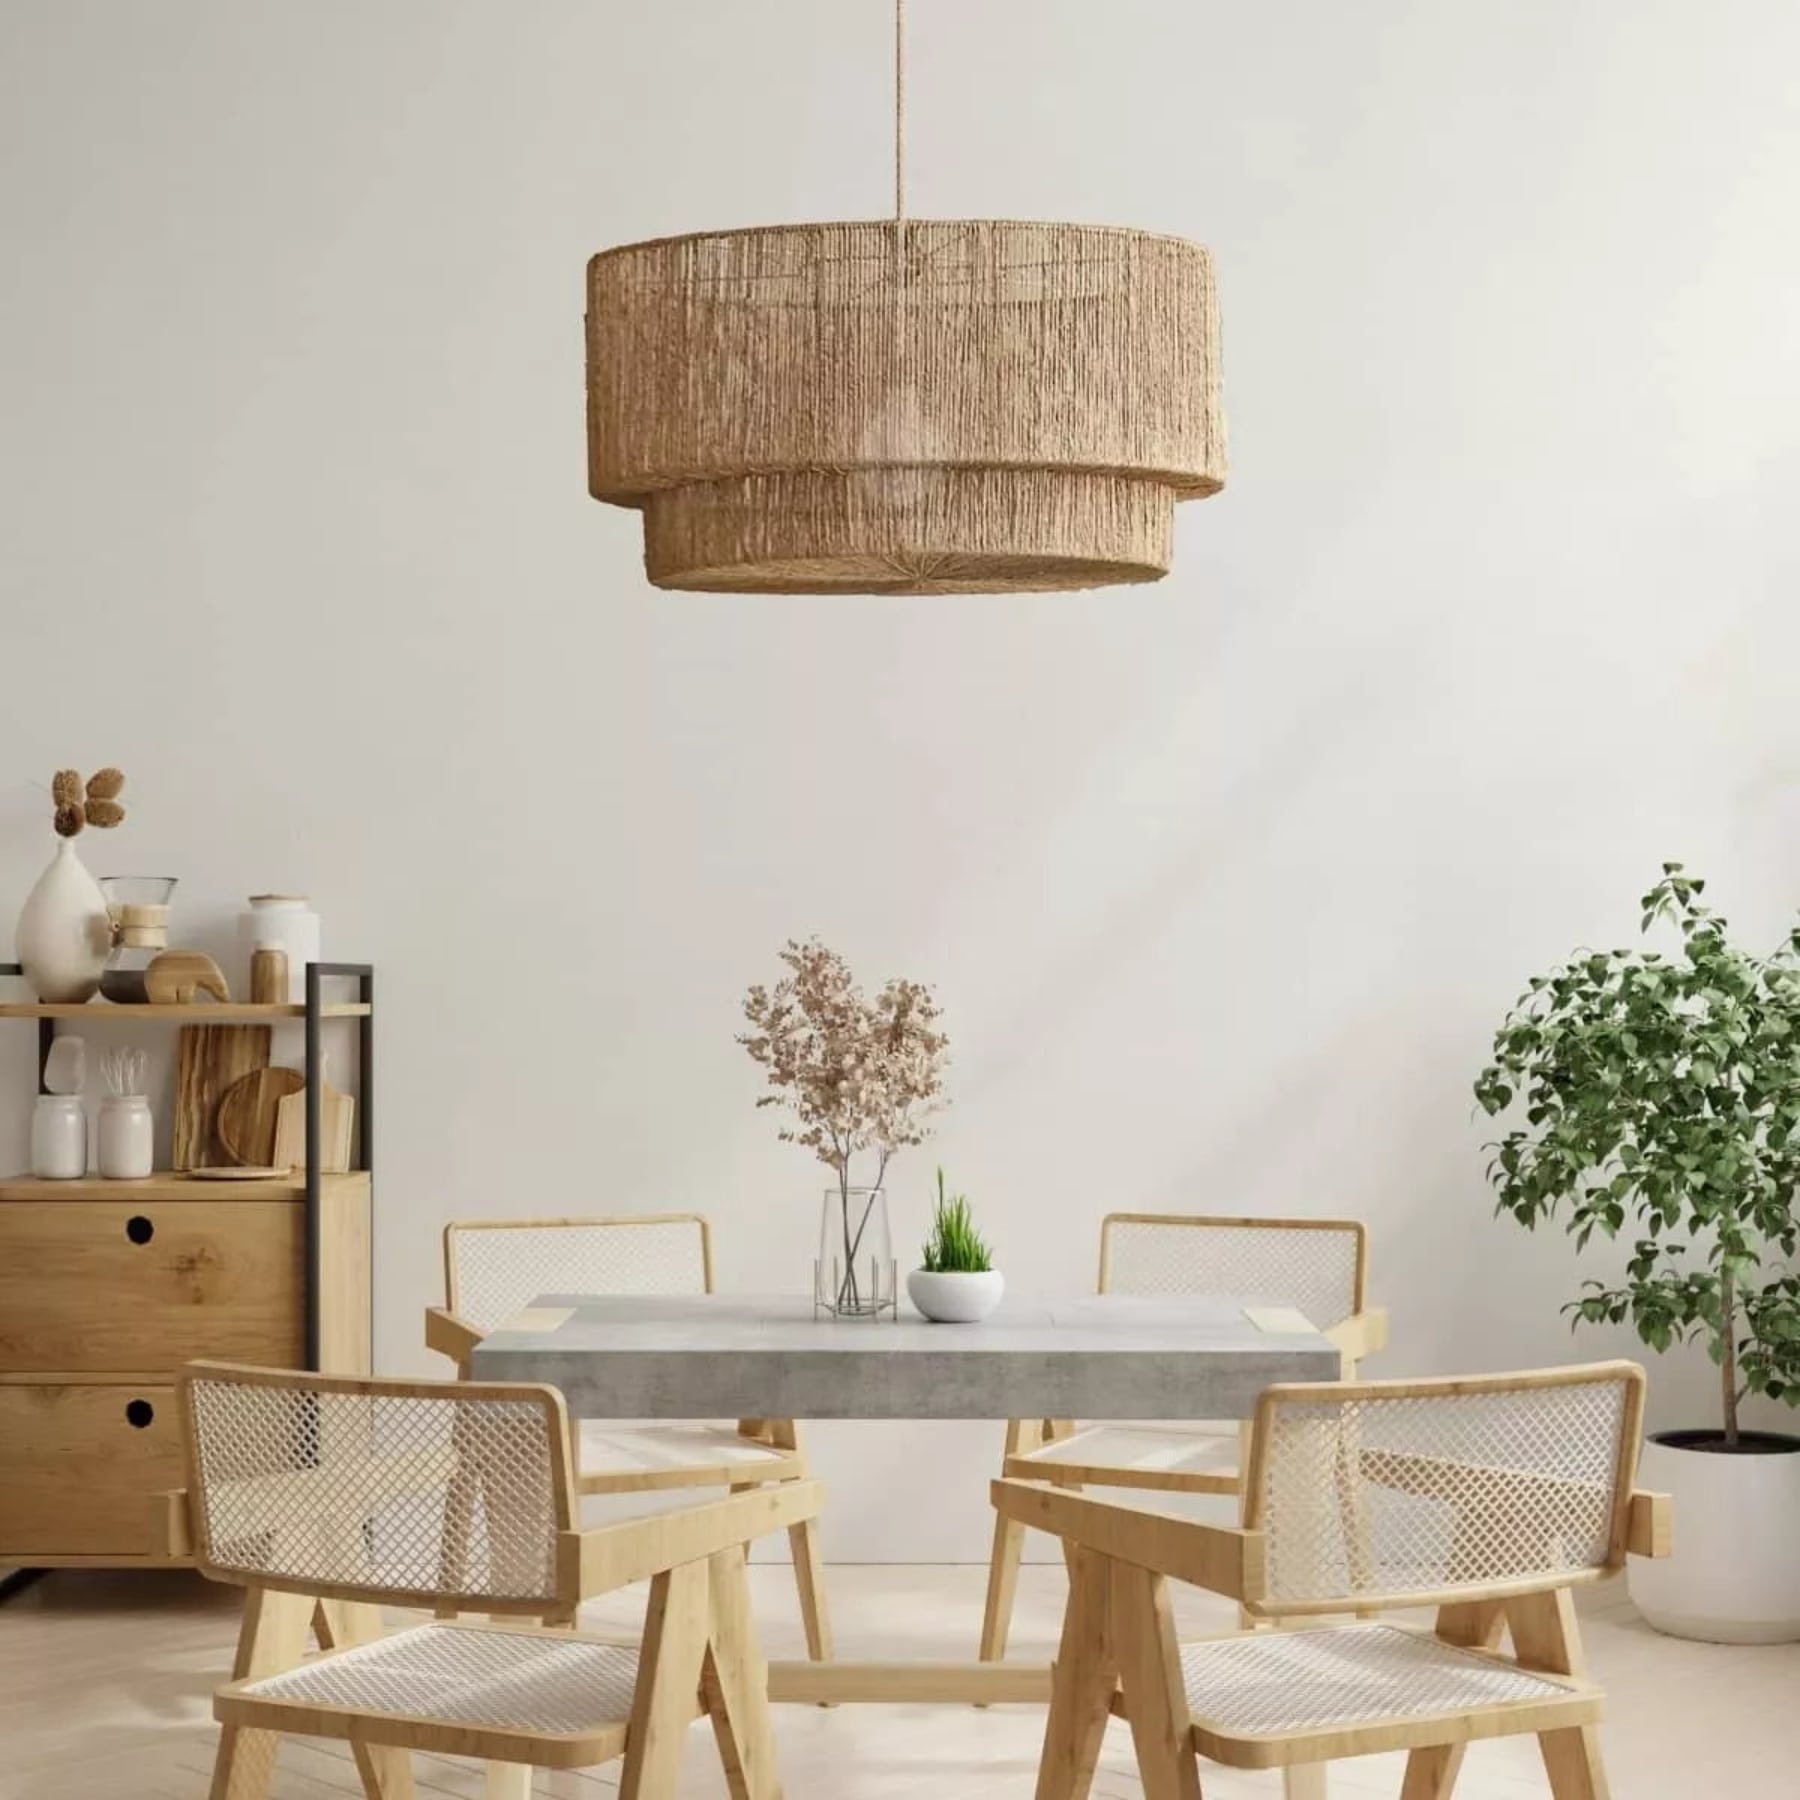 rowabis luminous lace rattan hanging lamp is the epitome of luxury, creating a sexy and cozy look